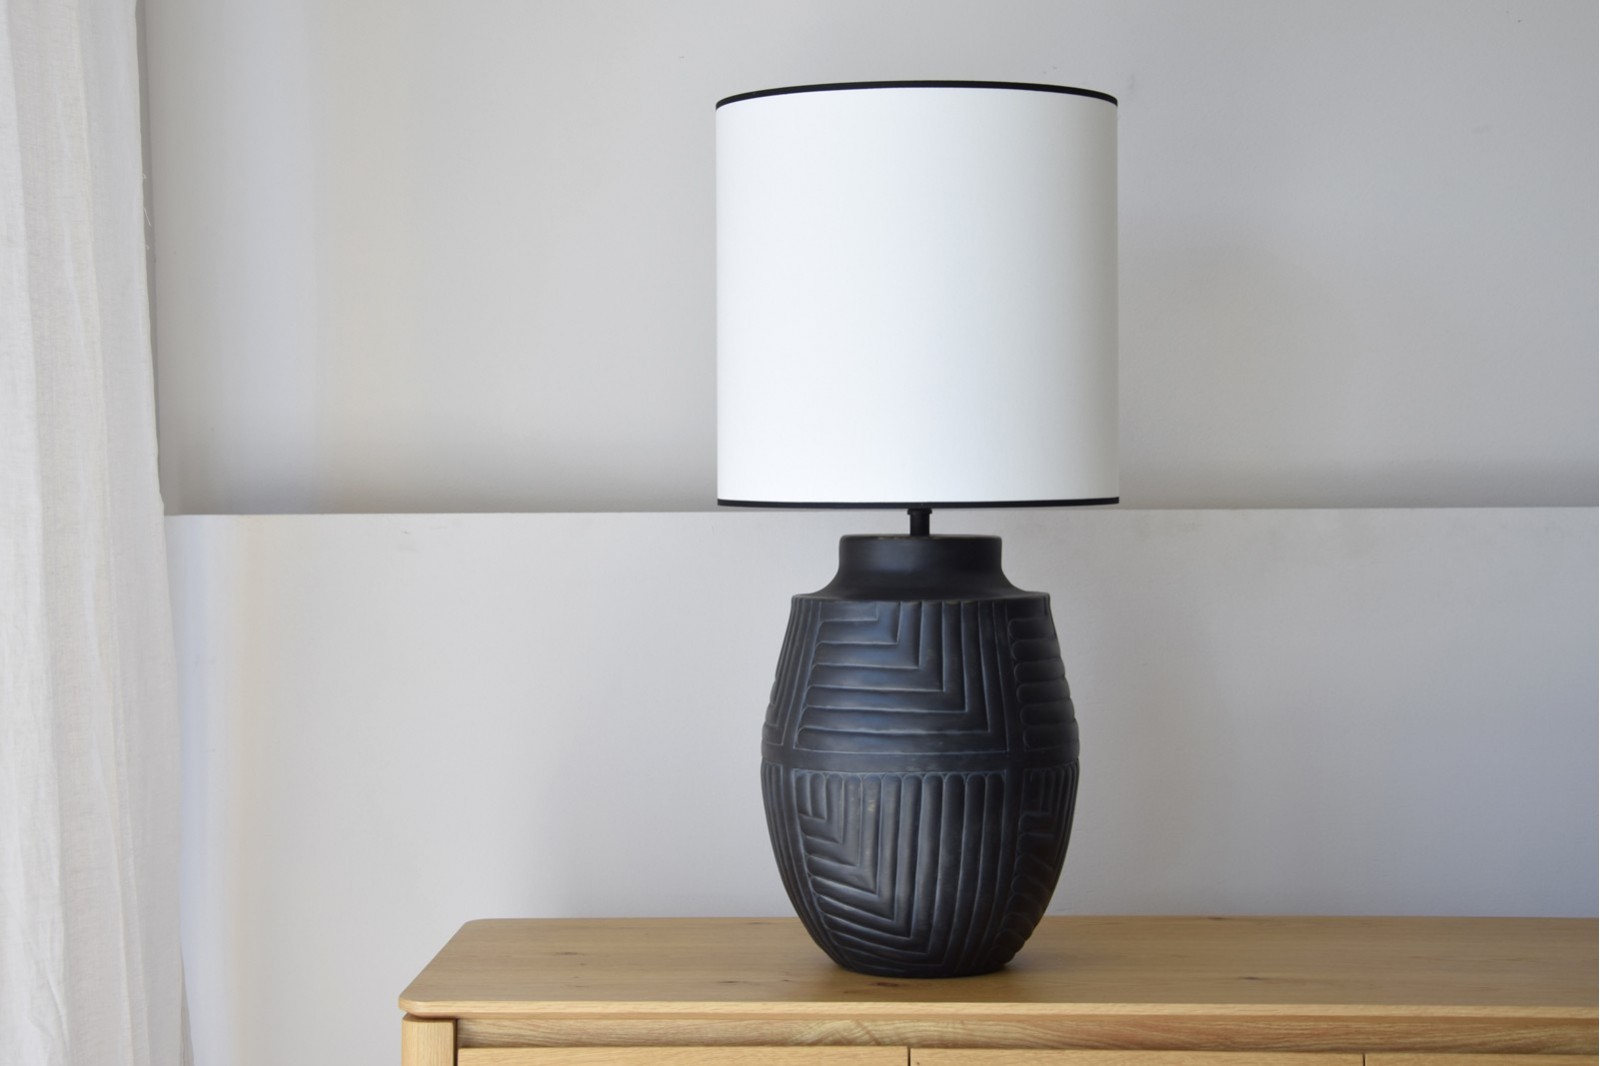 METAL TABLE LAMP N7 WITH SHADE